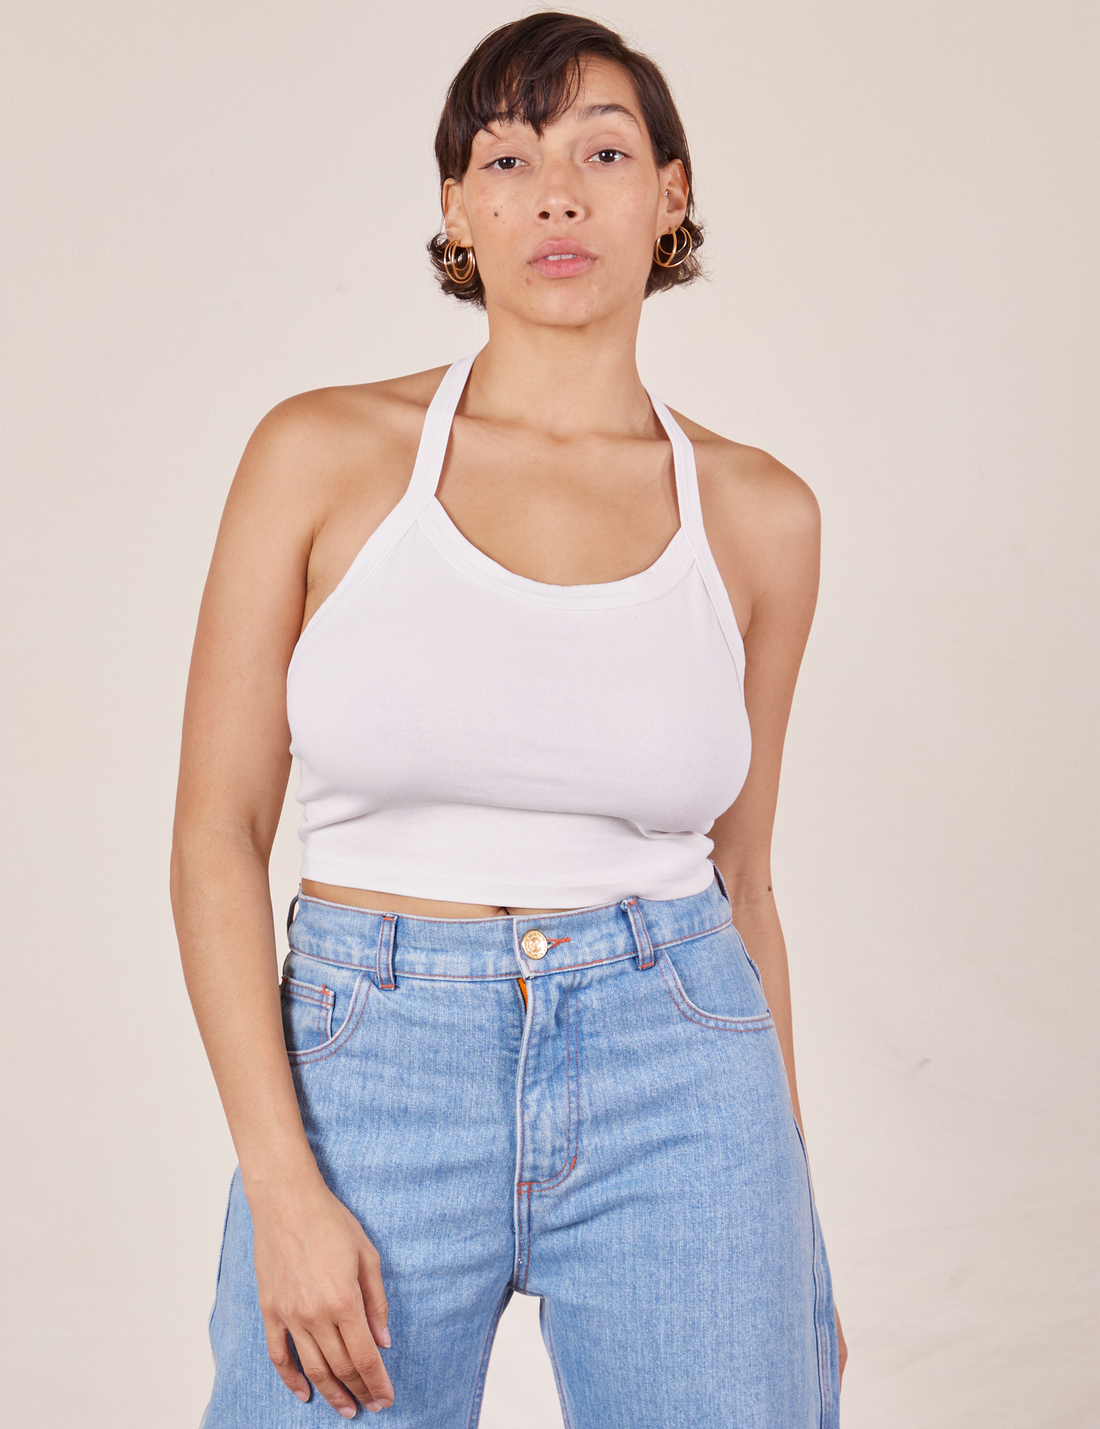 Tiara is 5'4" and wearing XS Halter Top in Vintage Off-White paired with light wash Sailor Jeans